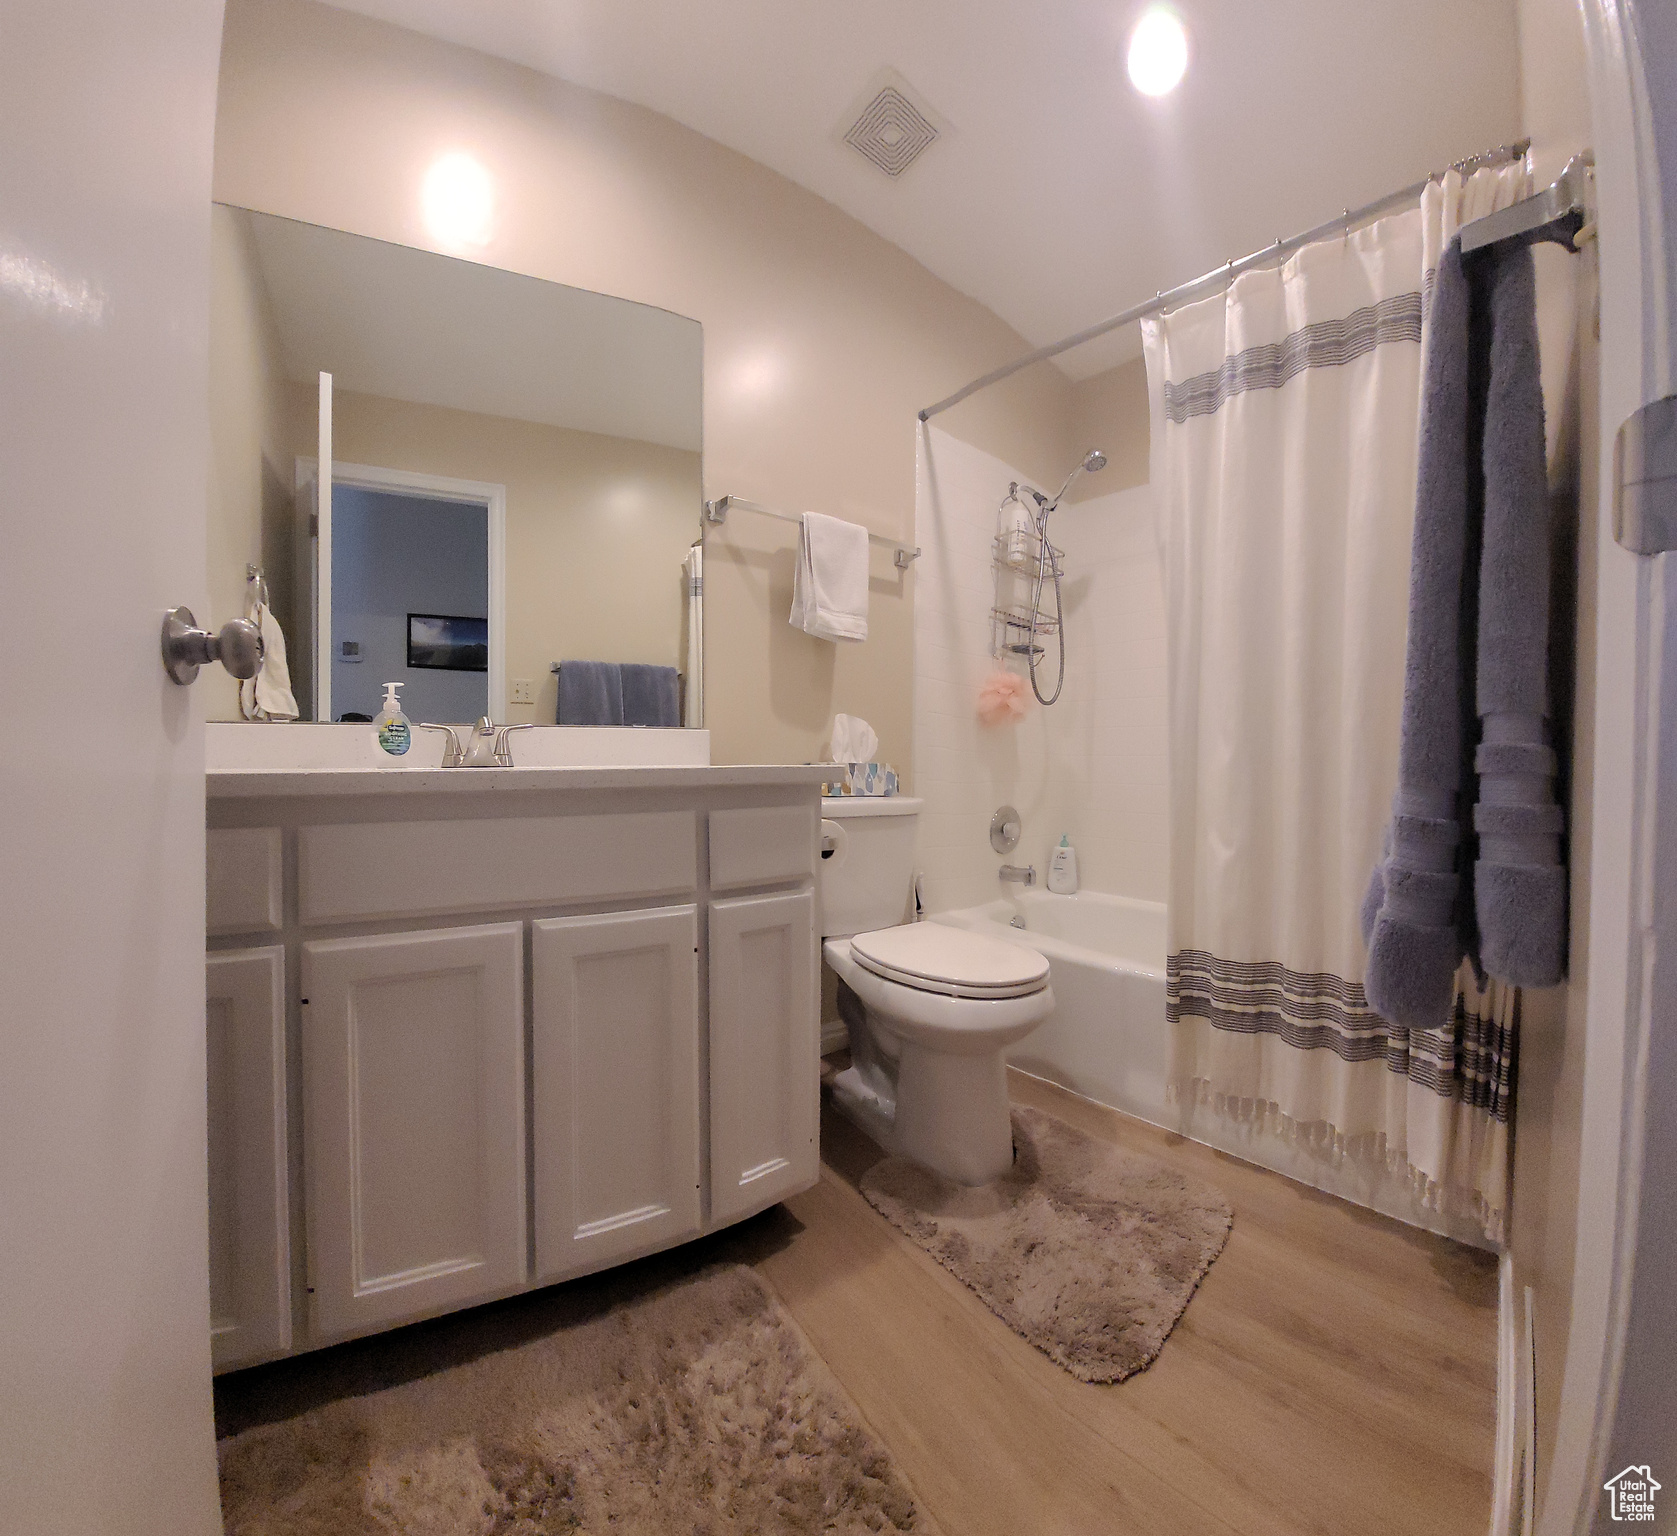 2nd bathroom in Hallway upstairs, with vanity, shower / bath combination with curtain, wood-type flooring, and toilet